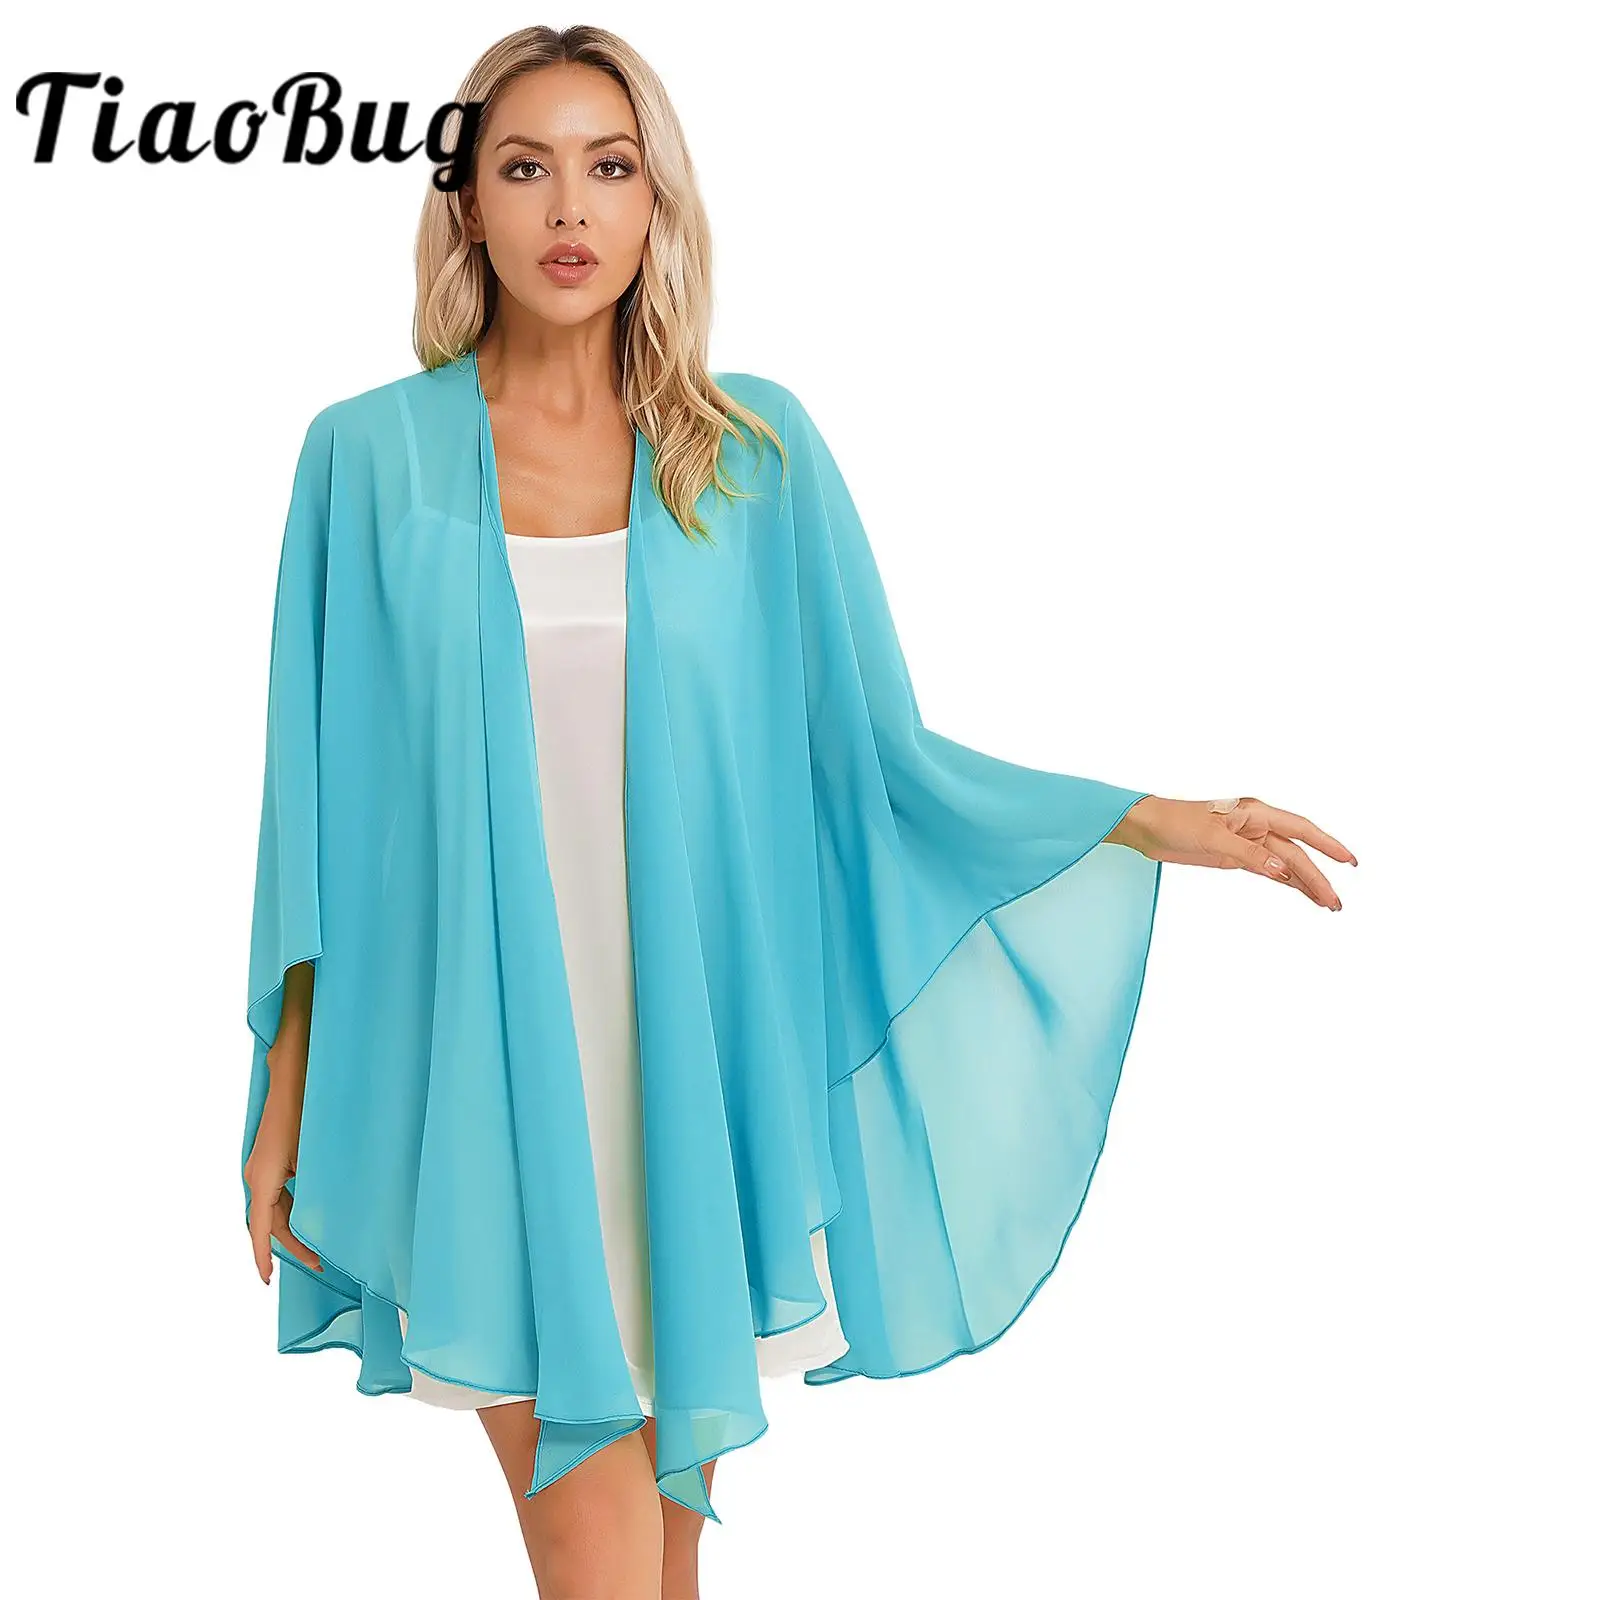 

Womens See-Through Chiffon Wraps Shawl Evening Wedding Bridal Cape Overlay Outdoor Beachwear Cover Ups for Dress Accessories